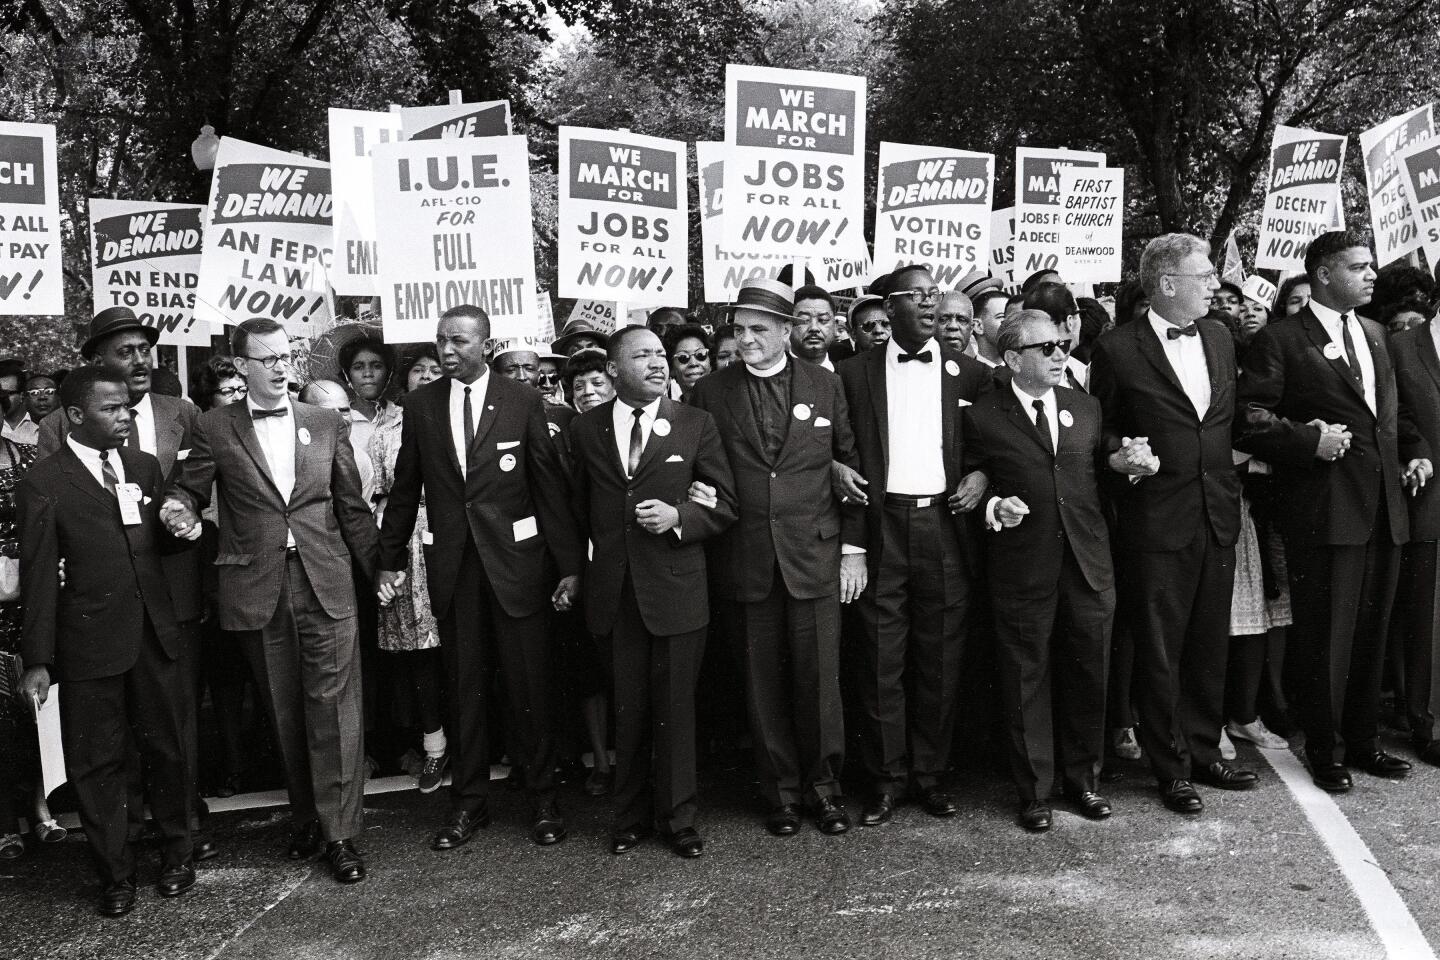 Civil rights activists in suits link hands and carry signs during the March on Washington in 1963